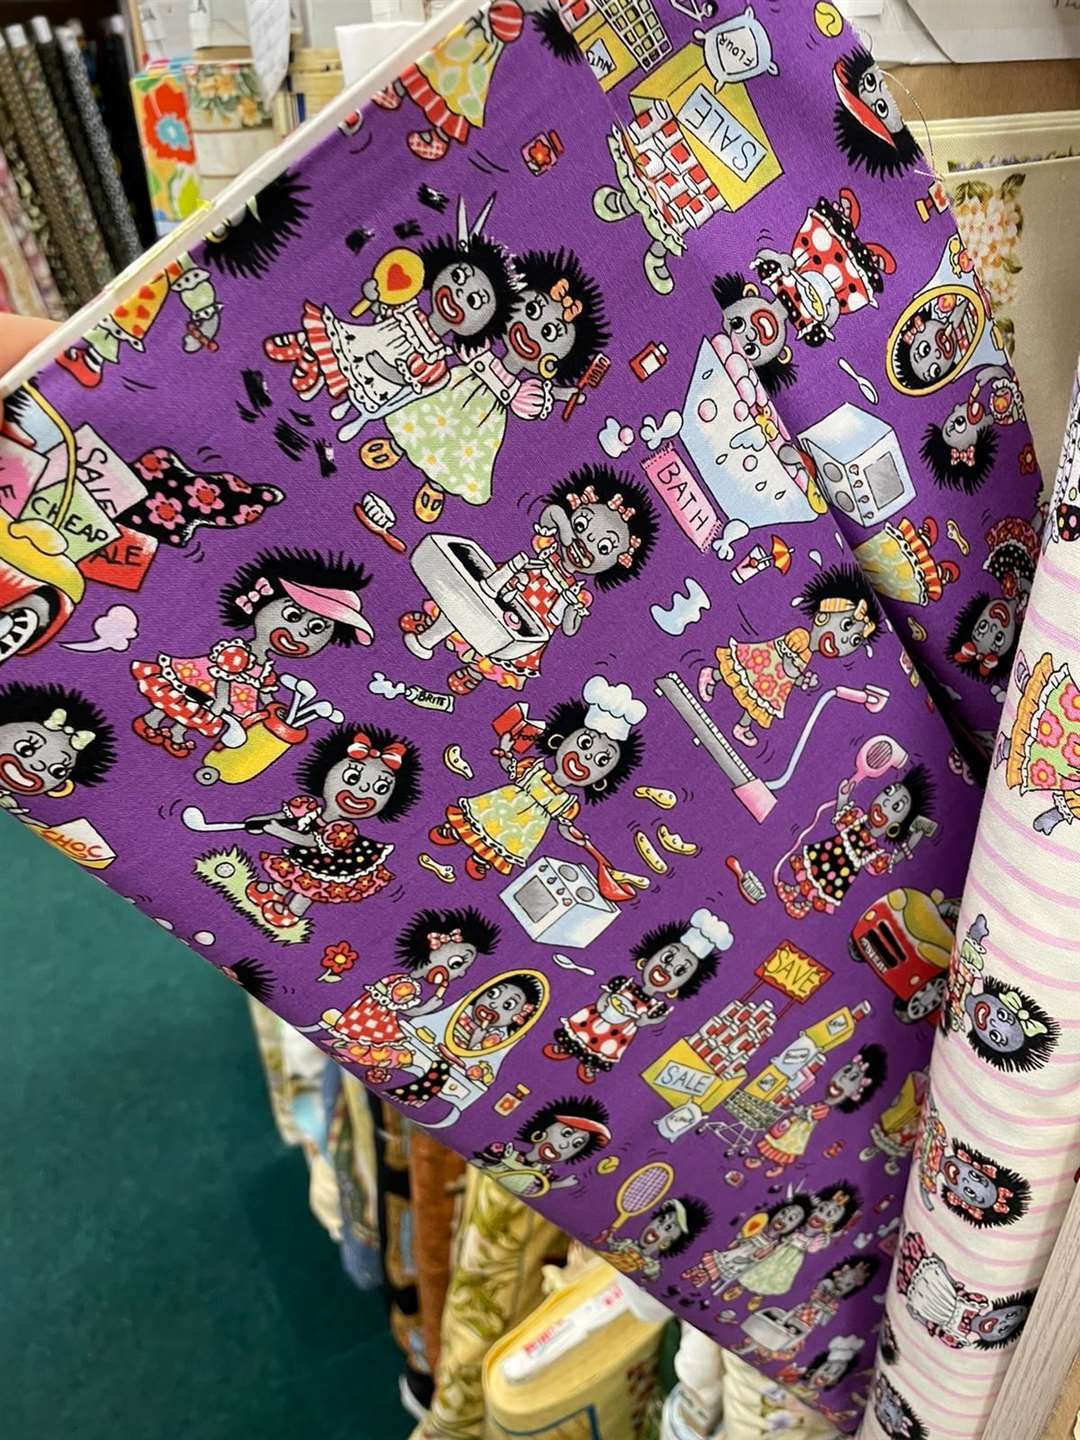 The controversial fabric was found at World of Sewing in Camden Road, Tunbridge Wells